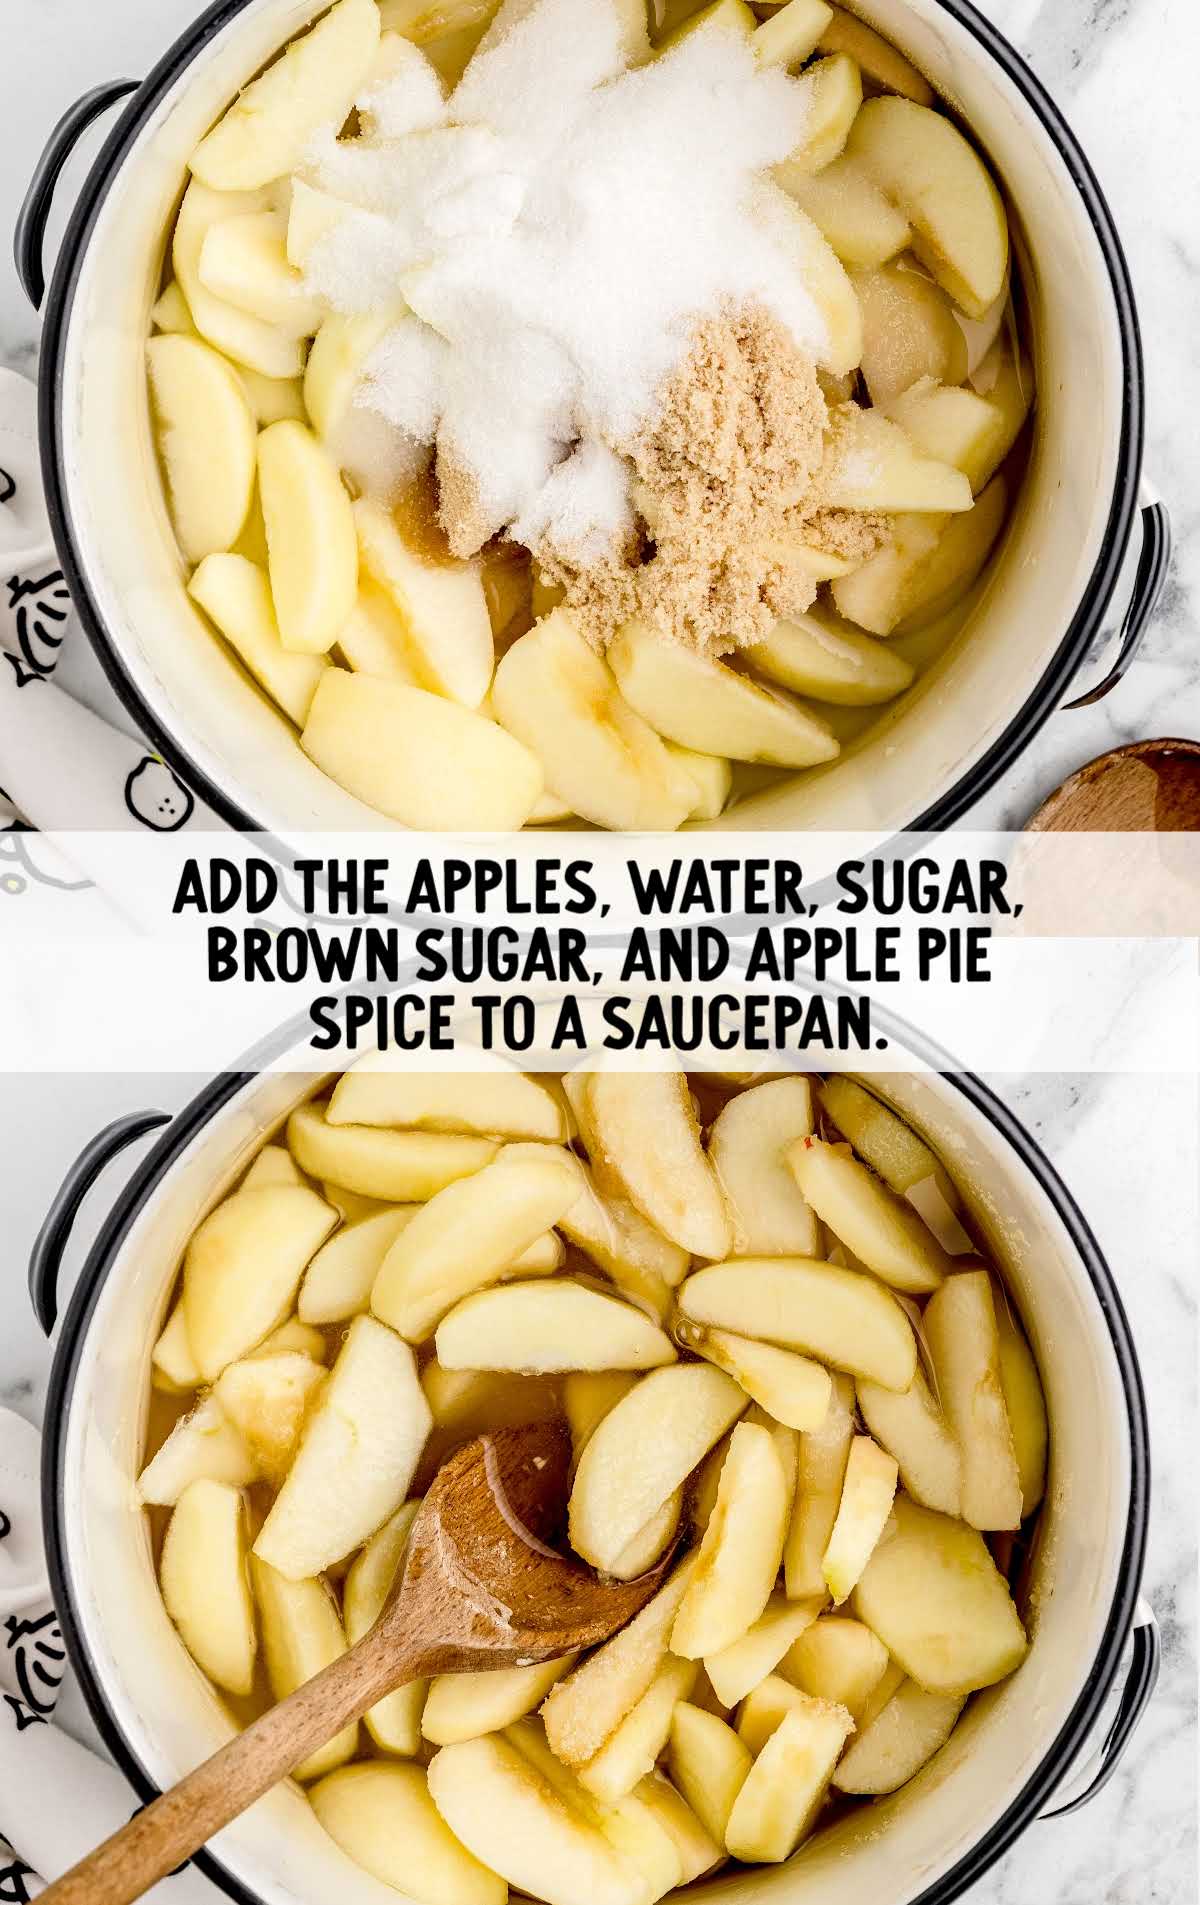 apples, water, sugar, brown sugar, and apple pie added to a saucepan